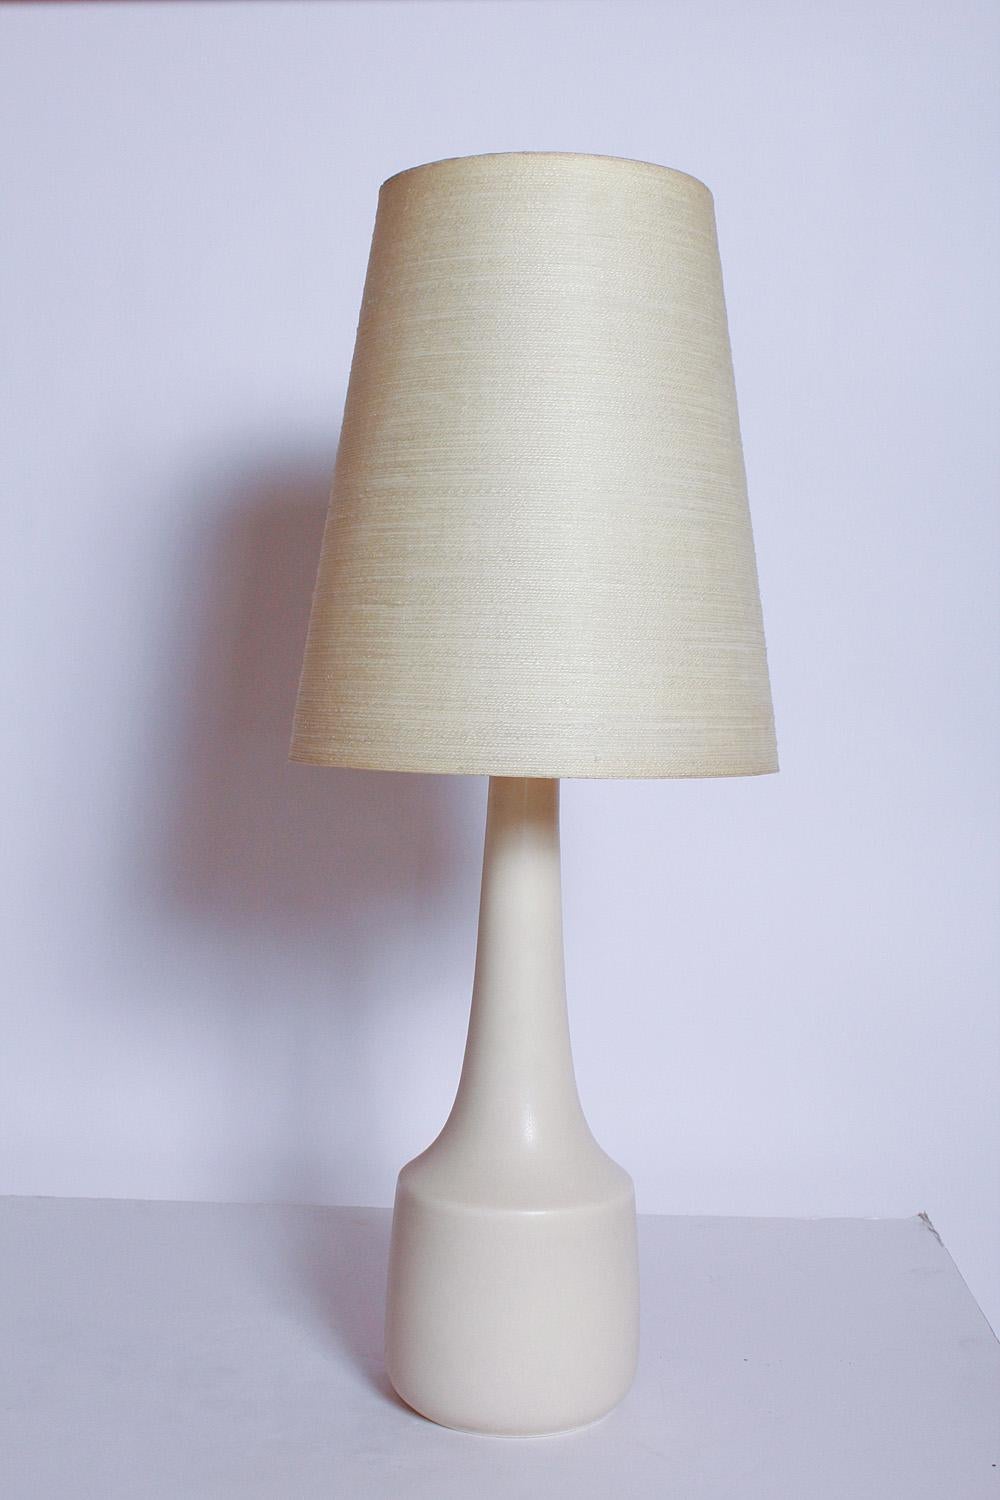 Creamy ceramic table lamps with original fiberglass and bleached jute lampshades by Lotte and Gunnar Bostlund, circa 1970. Please note that this is a matched pair... shades and lamps appear as different colors in the cover photo due to uneven